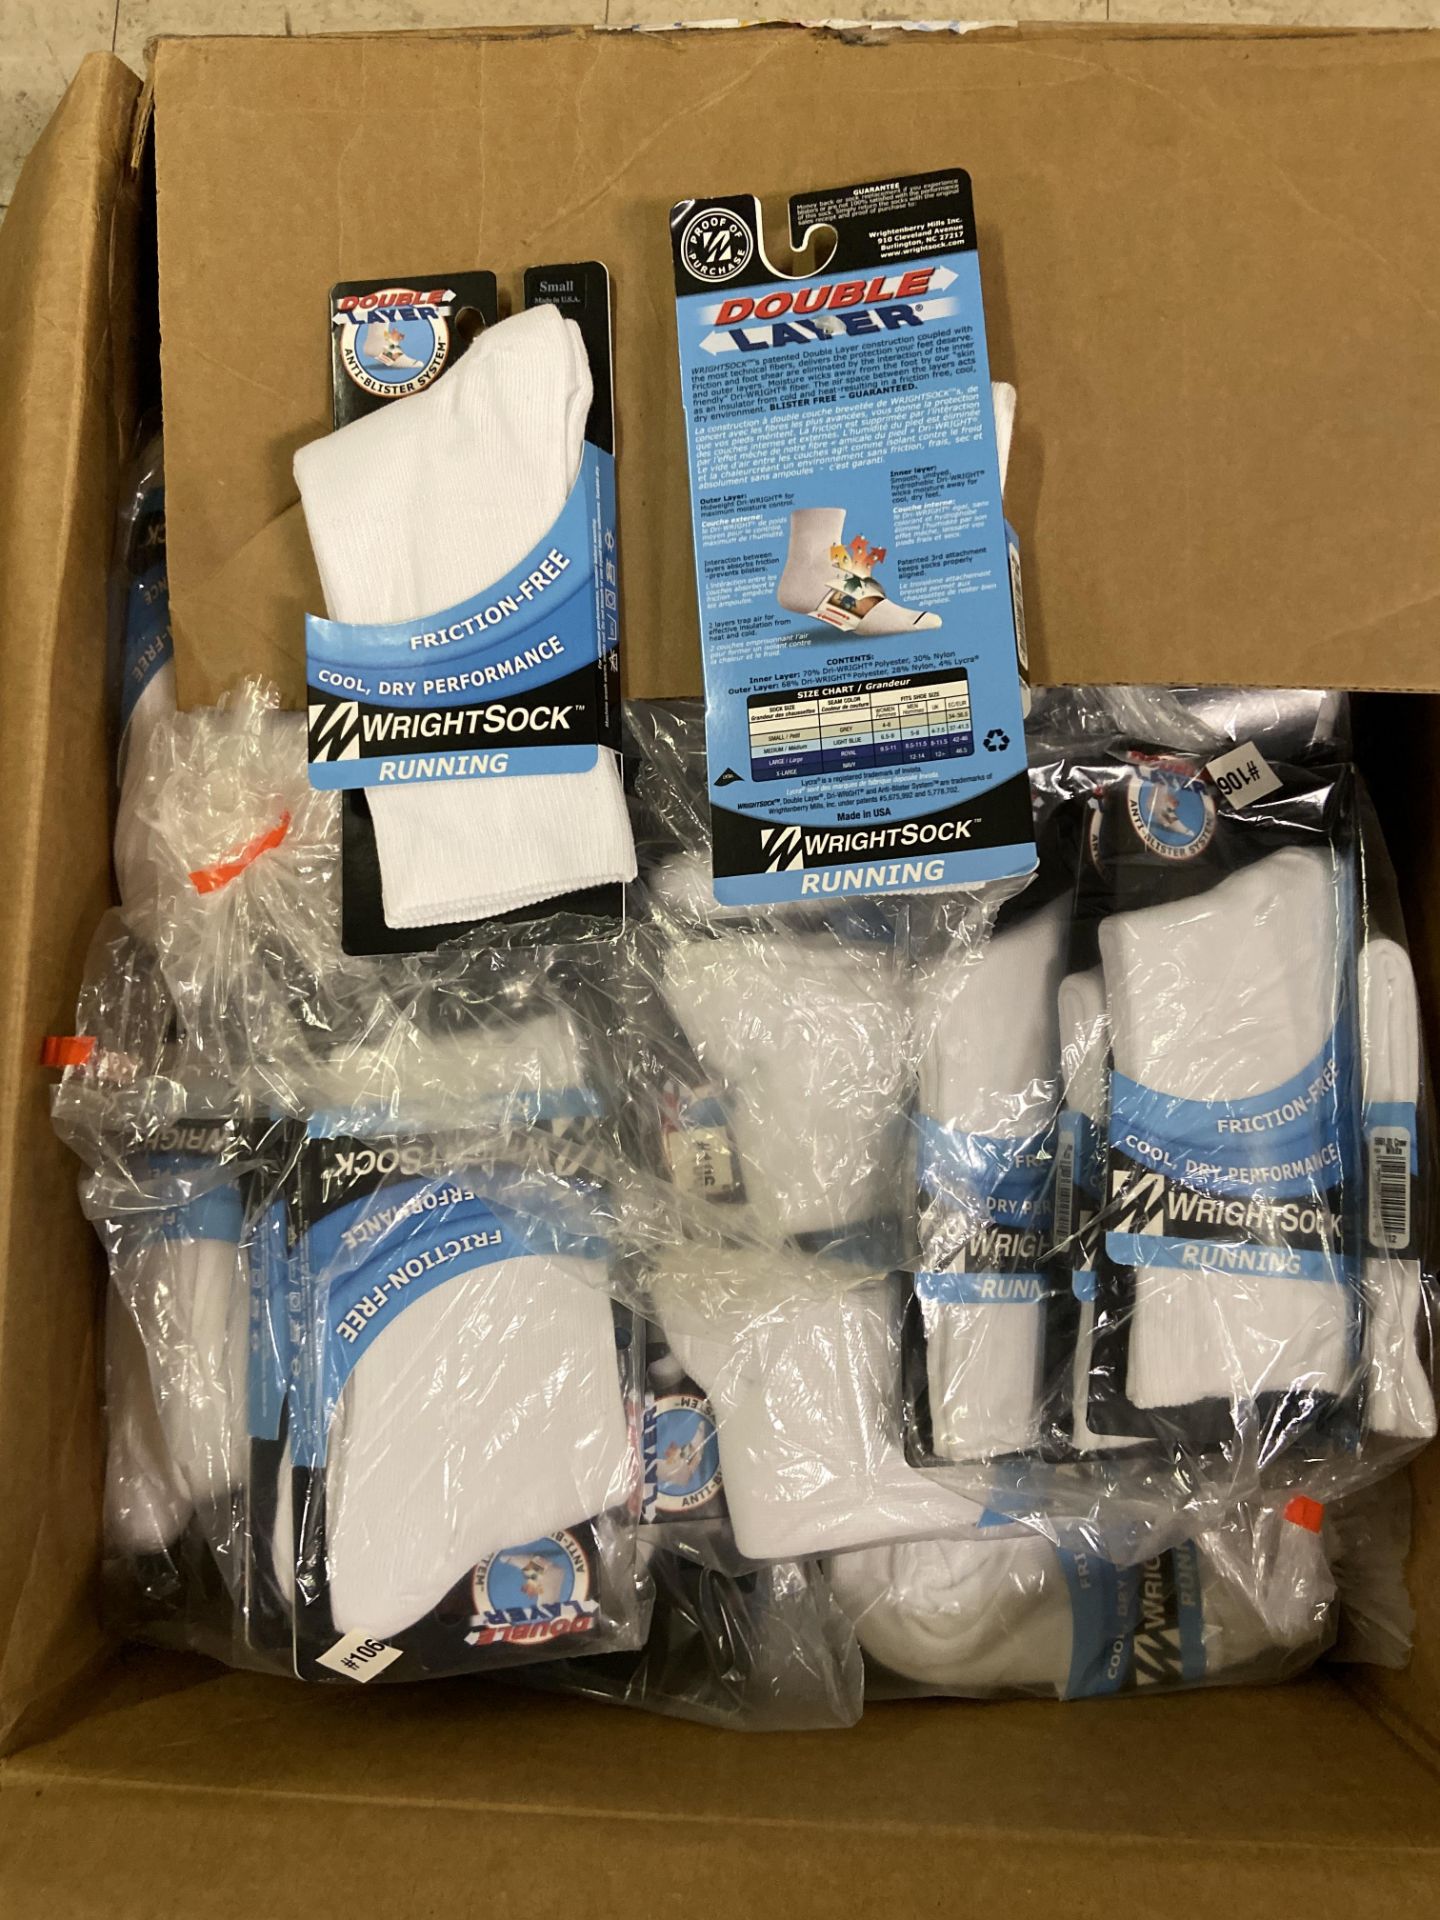 250+ packs of New Socks, Wrightsocks Running, Double Layer, White Lot includes approximately 250